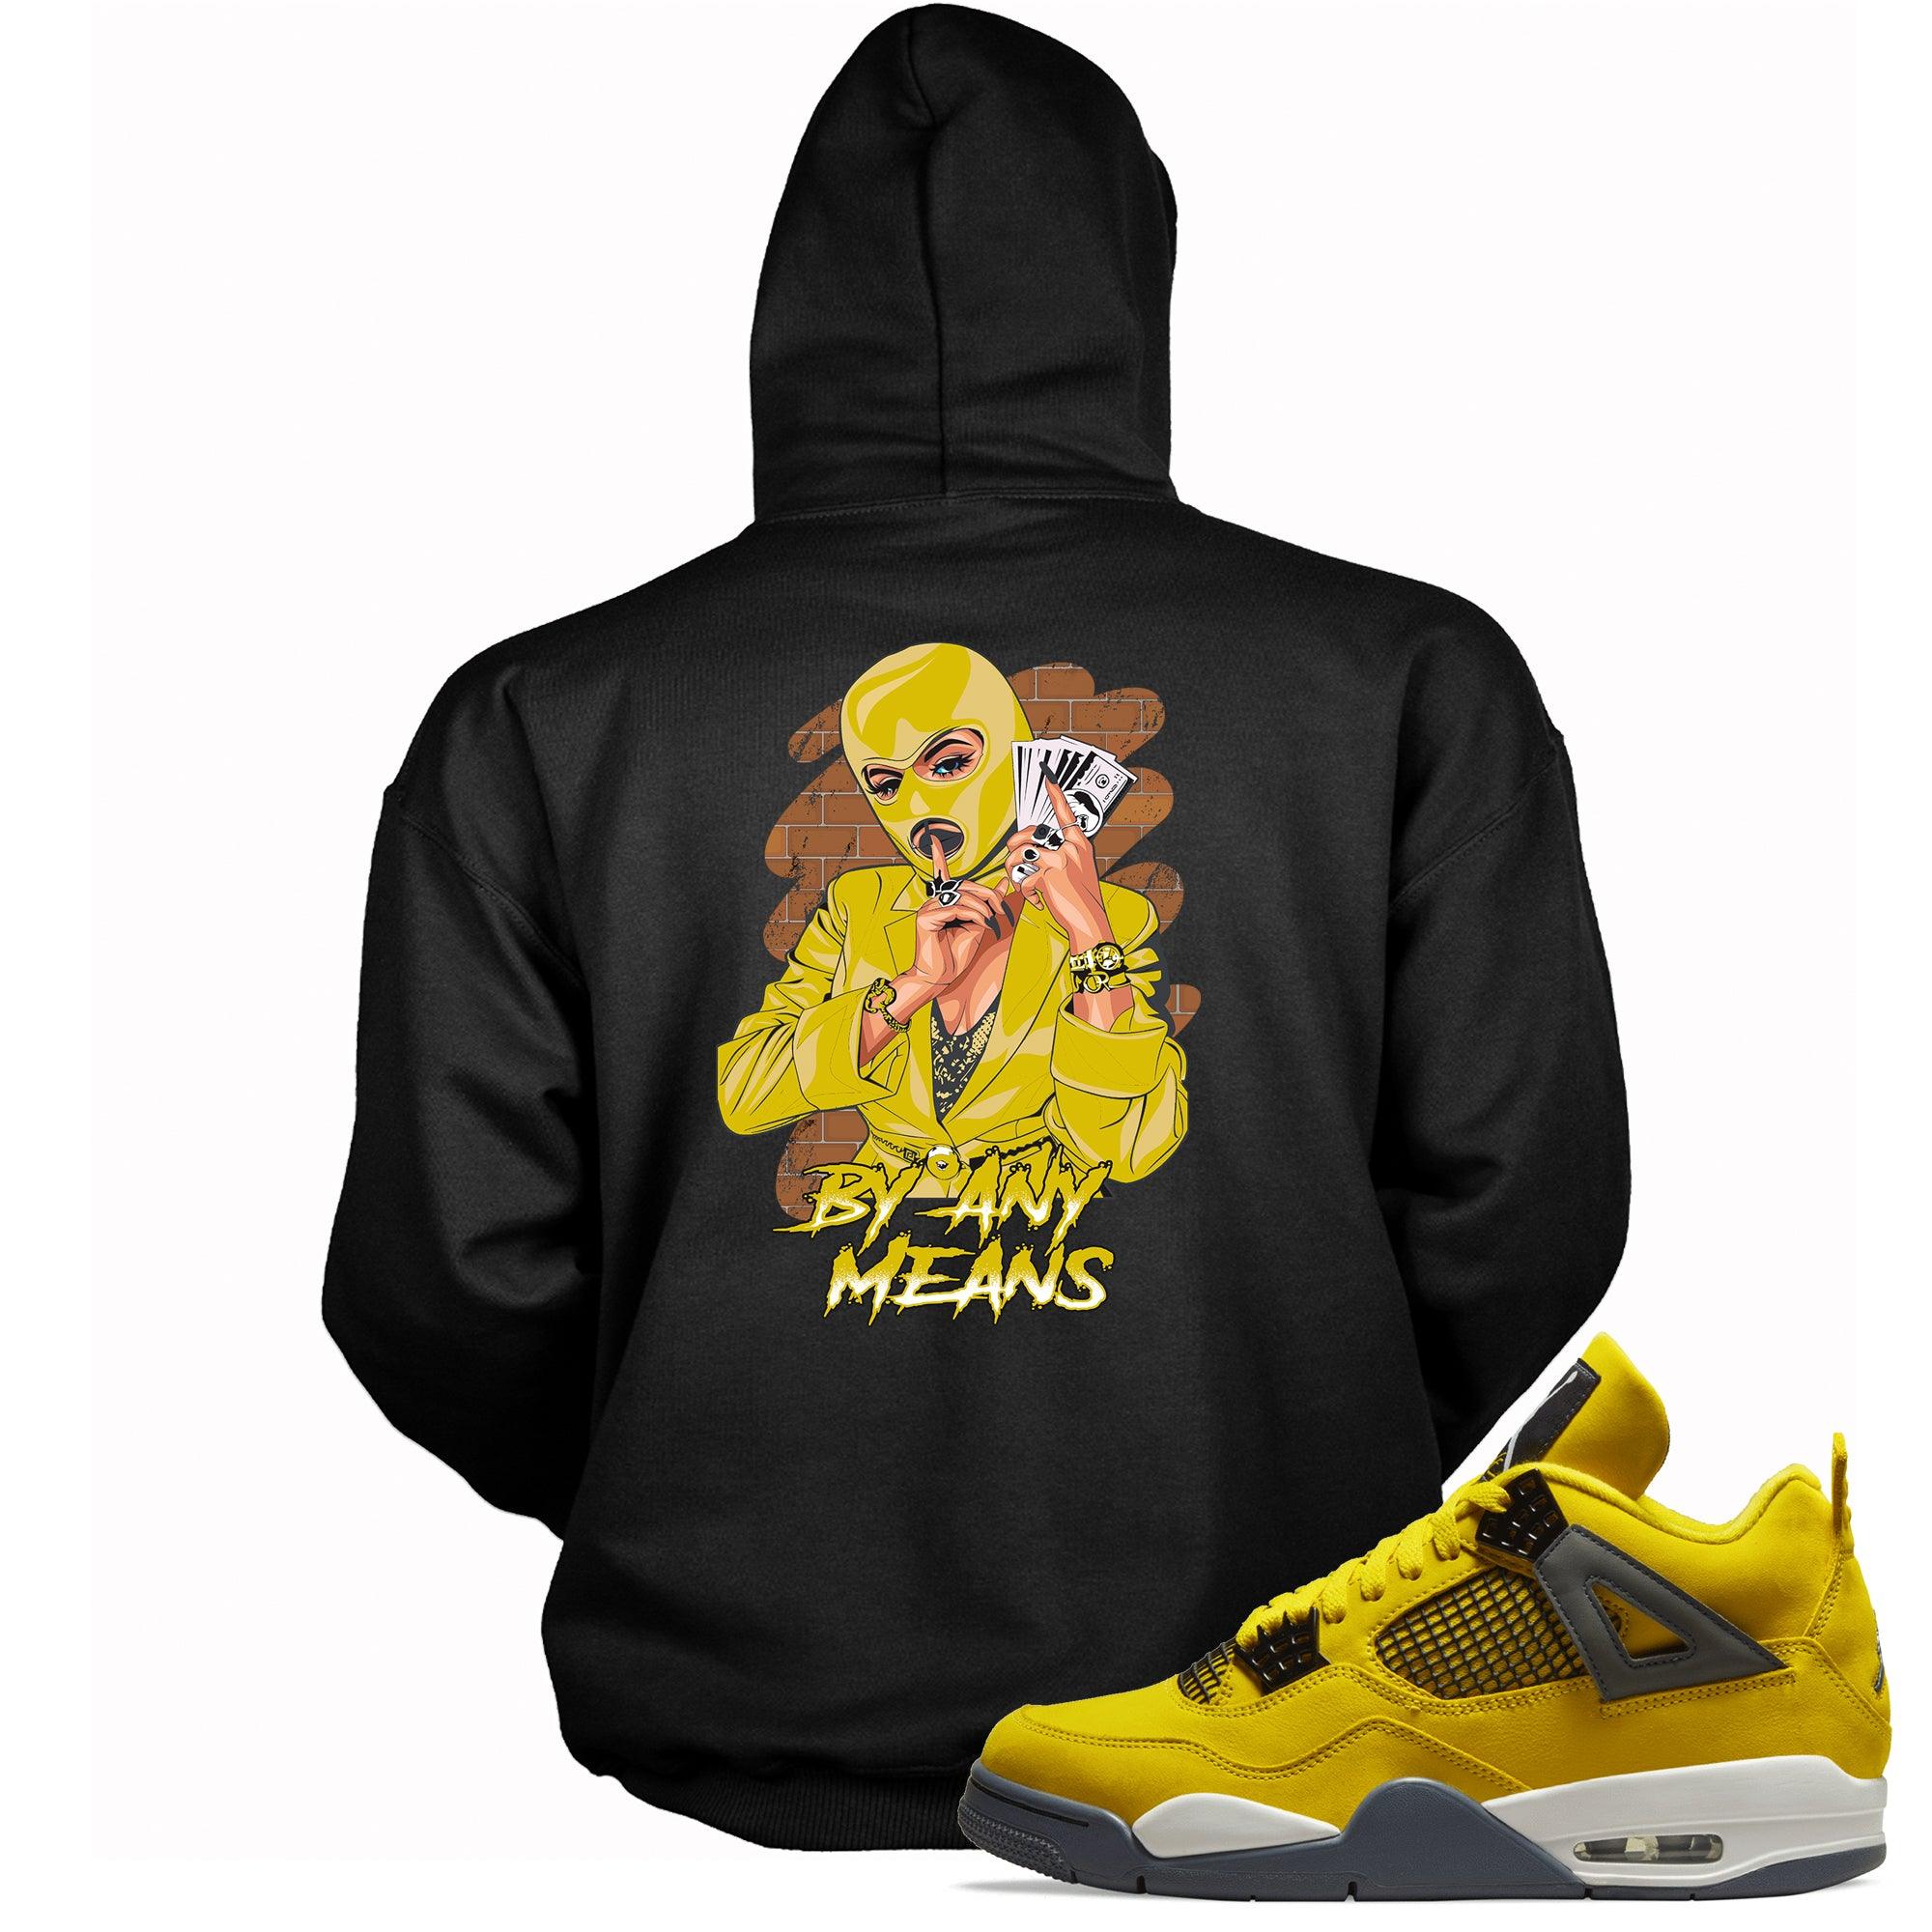 By Any Means Hoodie Jordan 4 Retro Lightning photo